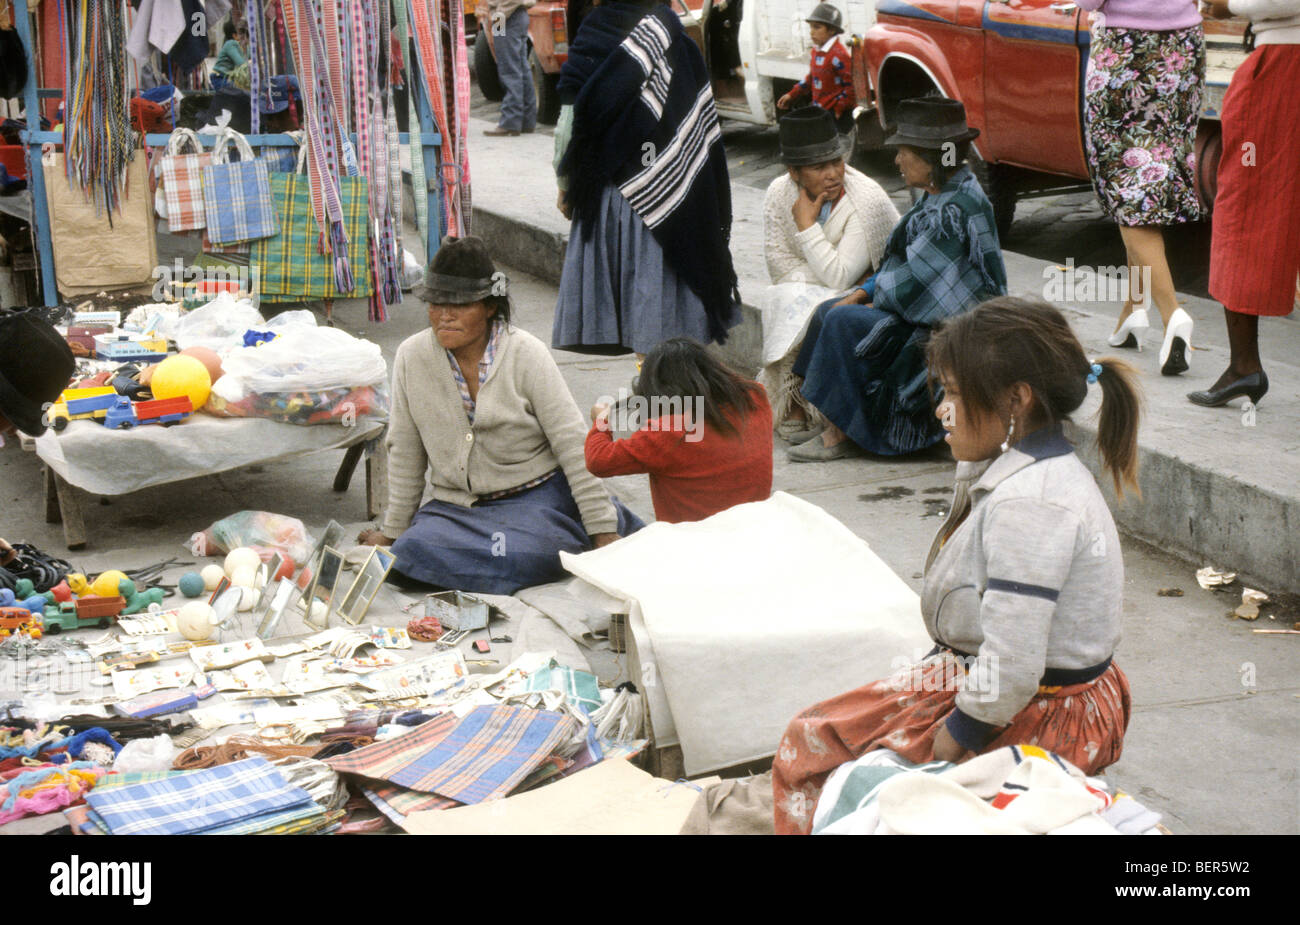 Three women one older to younger sit on ground behind stall of trinkets, bags and other general items. Stock Photo